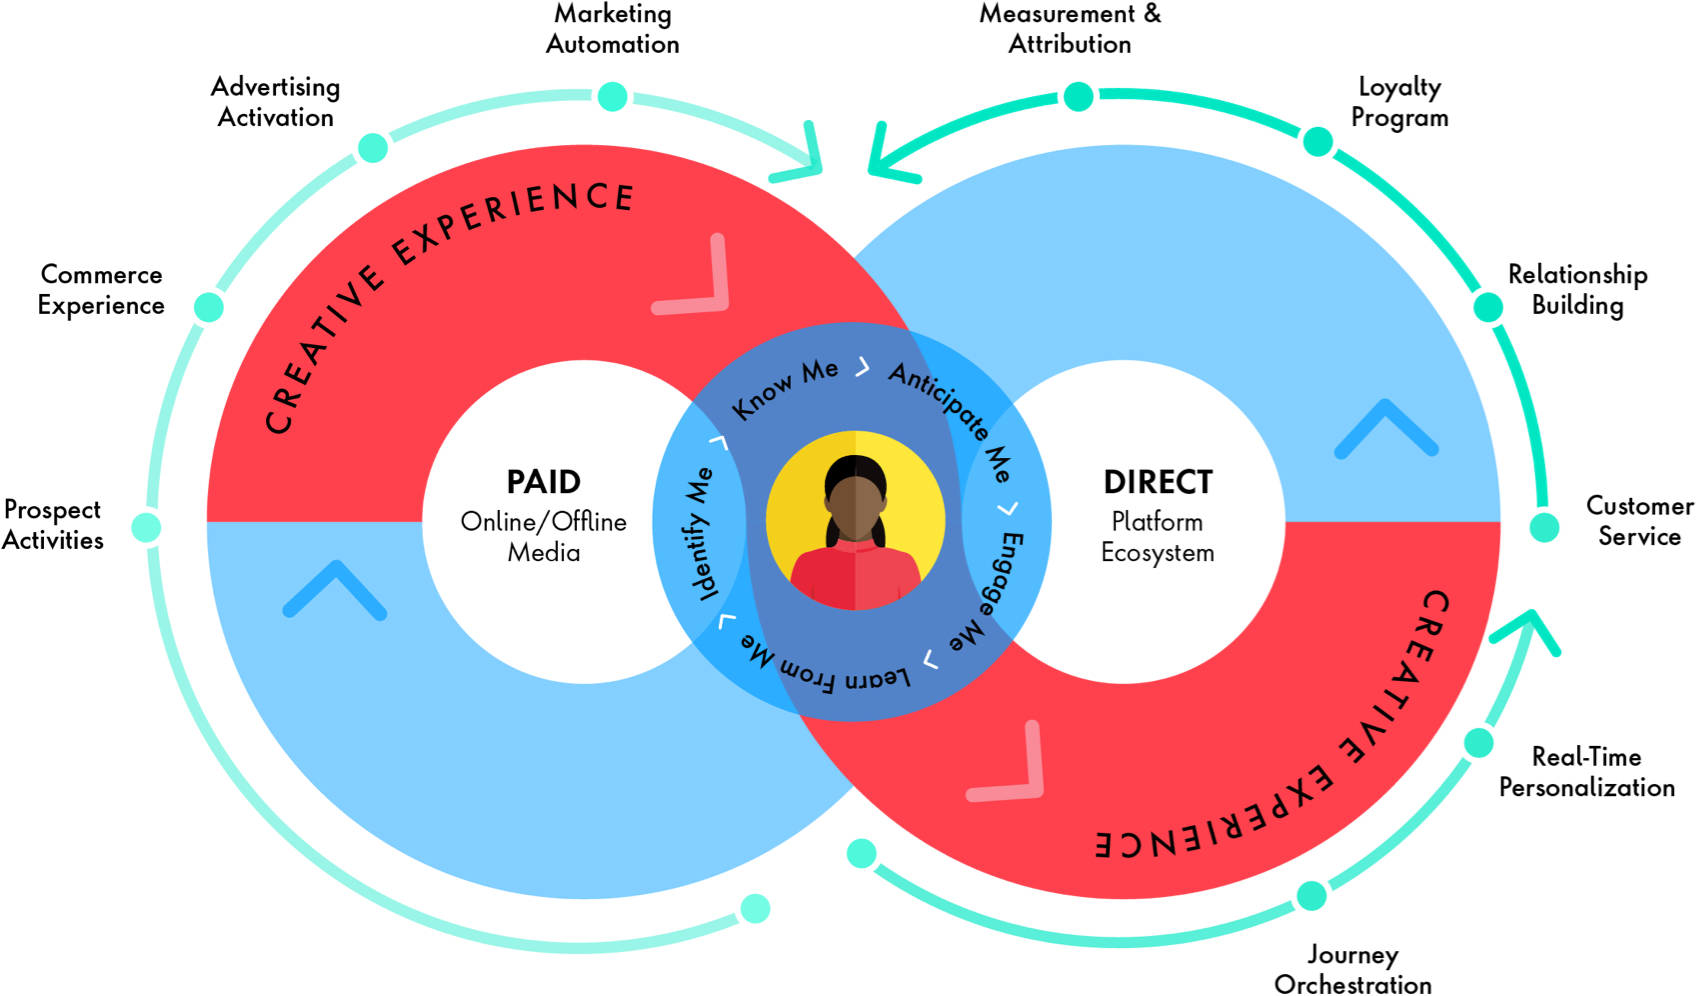 Circles represent paid data from online/offline media and direct data from the platform ecosystem, circle in the middle represents the customer